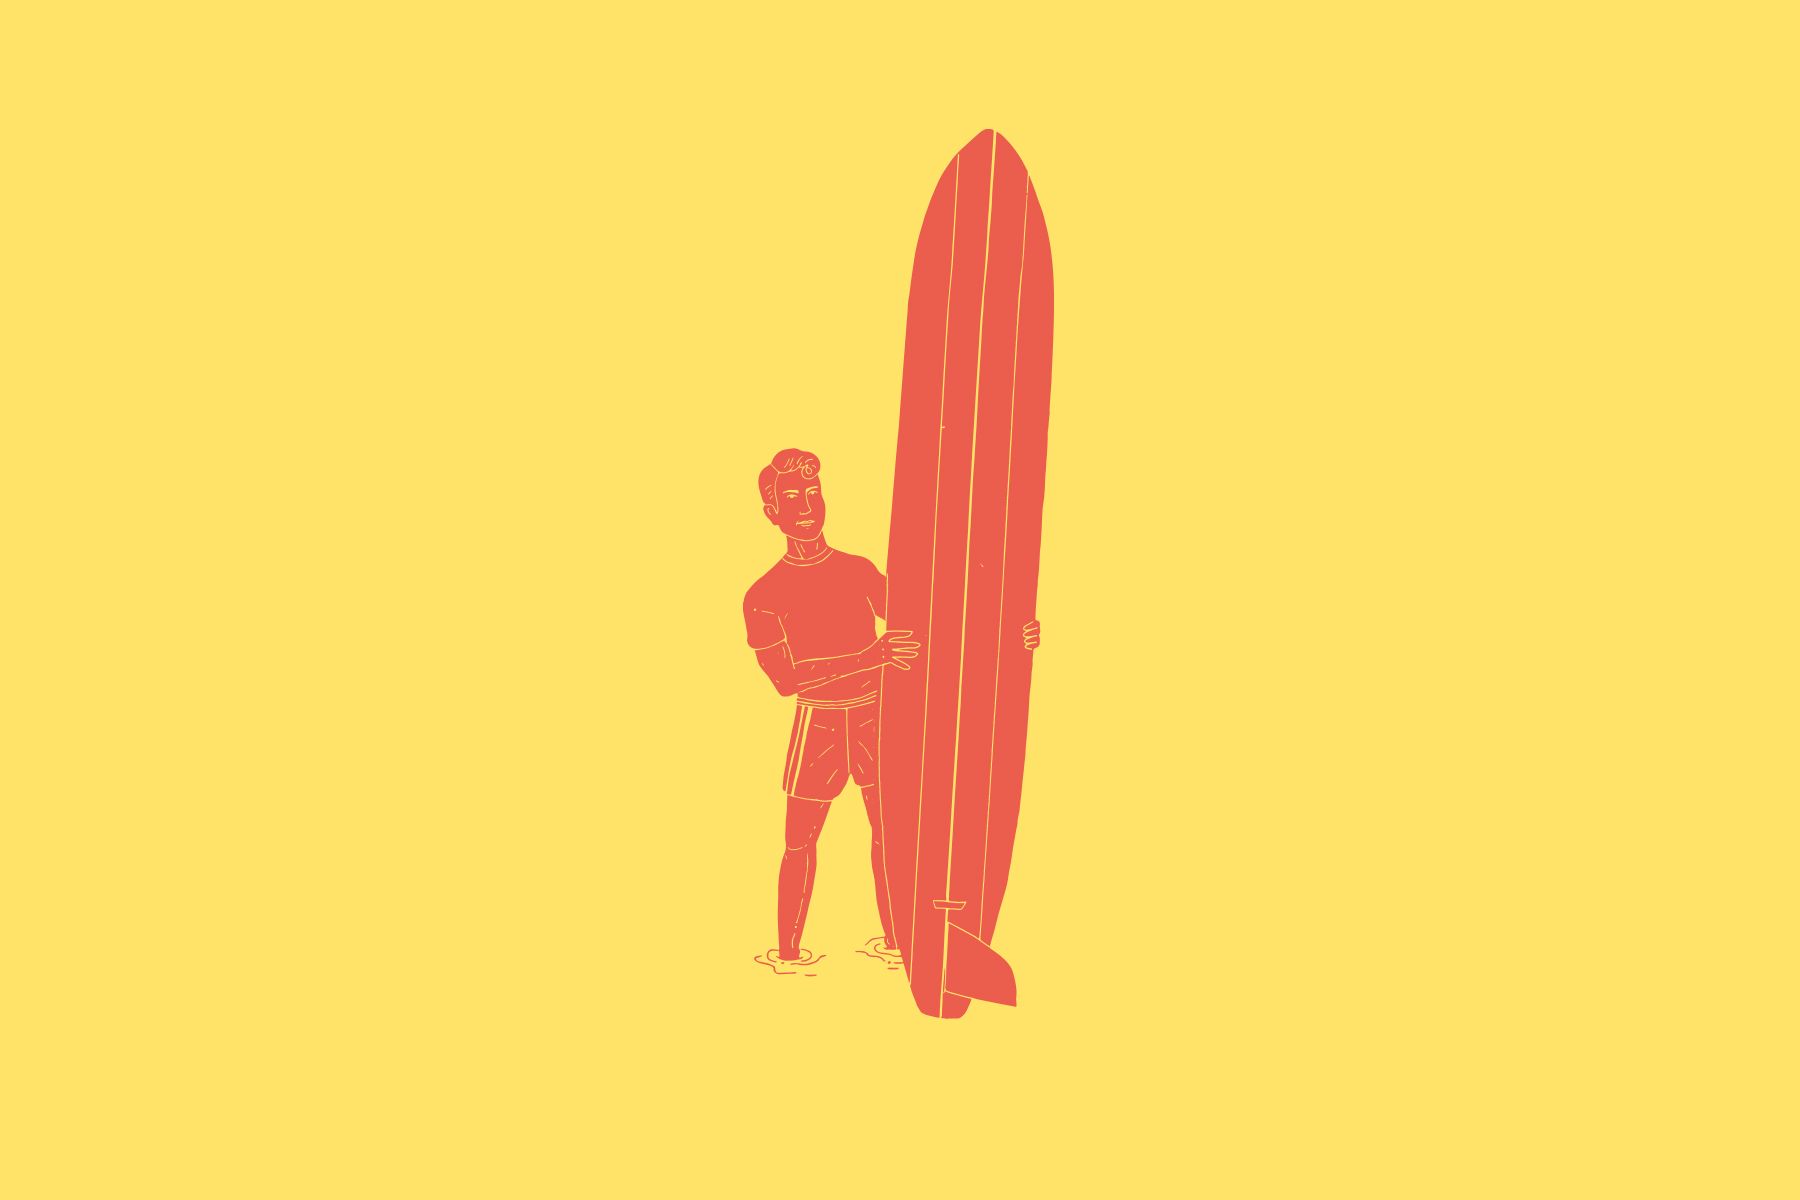 History of Surfboard Design: Dale Velzy and The Pig | Surf Simply